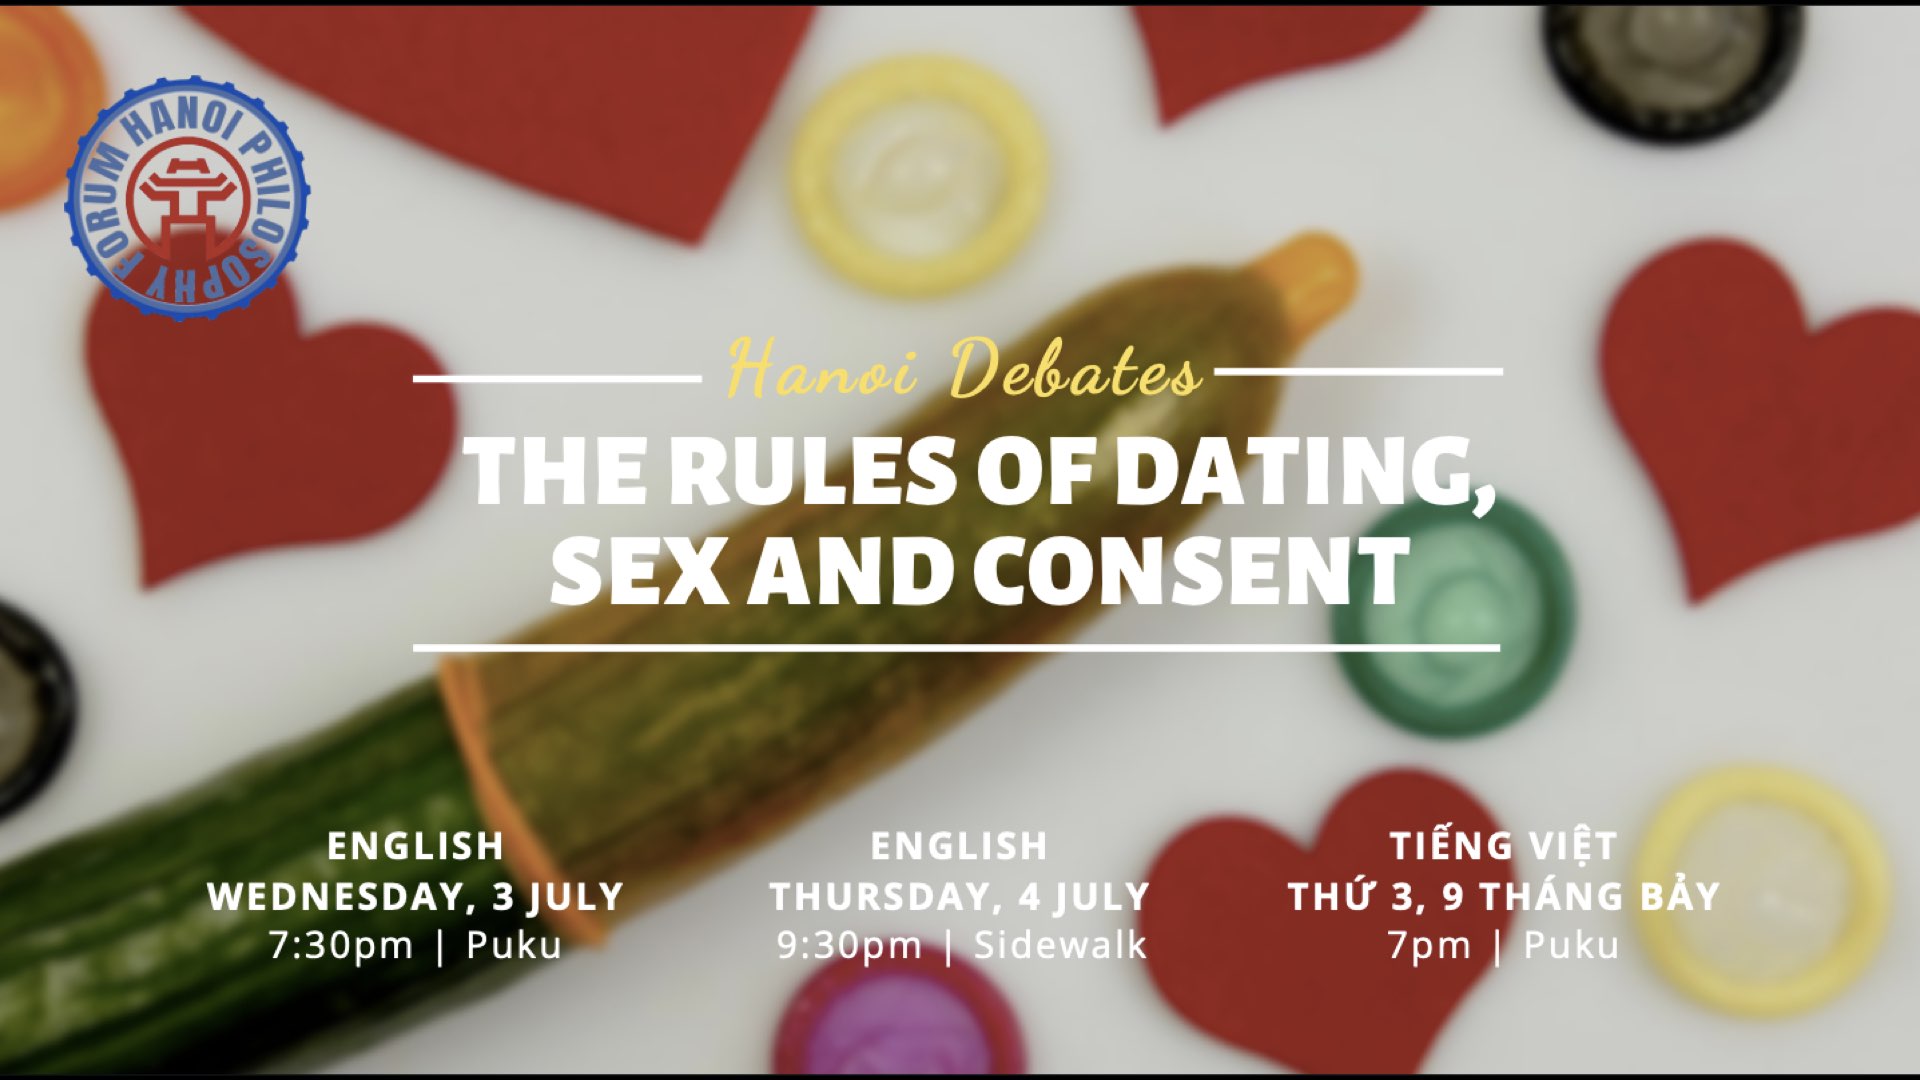 2019.06.03-04 The Rules of Dating, Sex, and Consent.002.jpeg